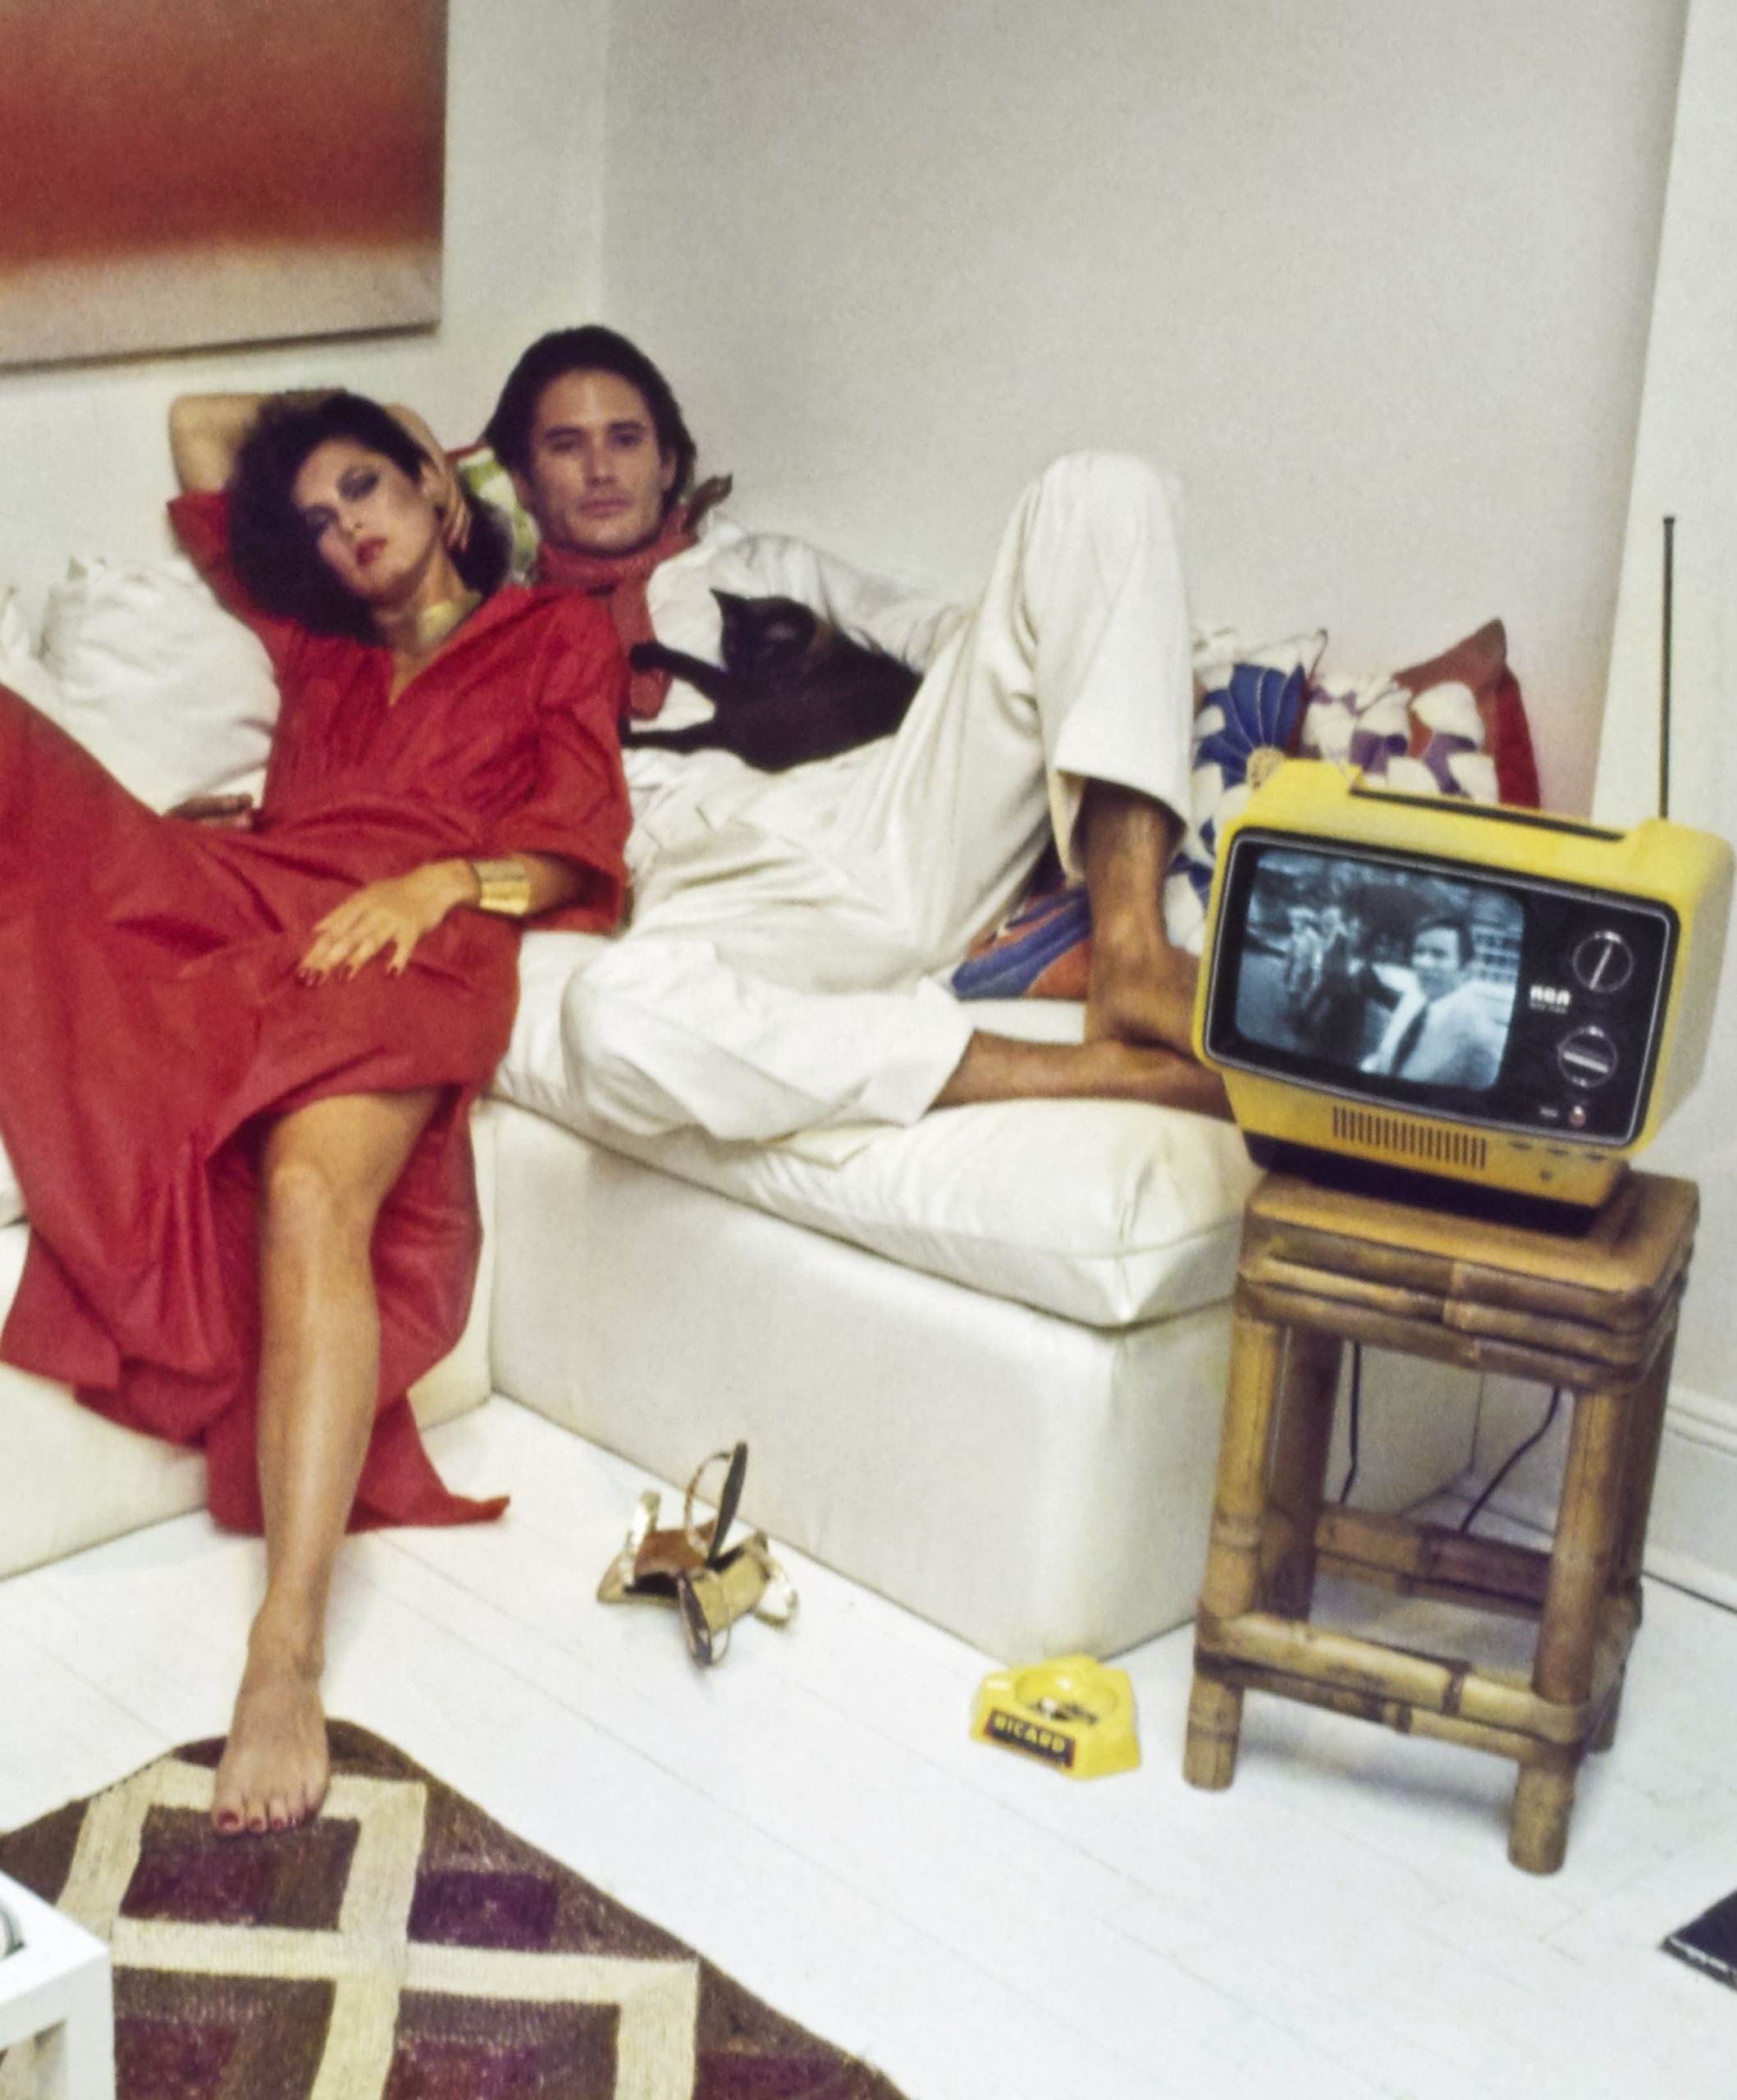 Model Dayle Haddon and male model reclining on a white sofa, watching TV (RCA's Sportable 9" screen in three different colors ). She is wearing Fernando Sanchez's red cotton caftan-style dress with high side slit, gathered at the waist, of Verron fabric. Styled with Berrin Designs earrings, Dionne Cole necklace, cuff by M&J Savitt, and shoes from Margaret Jerrold for Shoe Biz (on the floor next to her feet). Male model wears a white shirt and pants with a red polka-dot scarf. Hair by Harry King. Makeup by Sandra of Xavier Coiffures. Photographed in the New York City apartment of Mark Sephton and Arthur Scott. *** Local Caption *** Dayle Haddon;